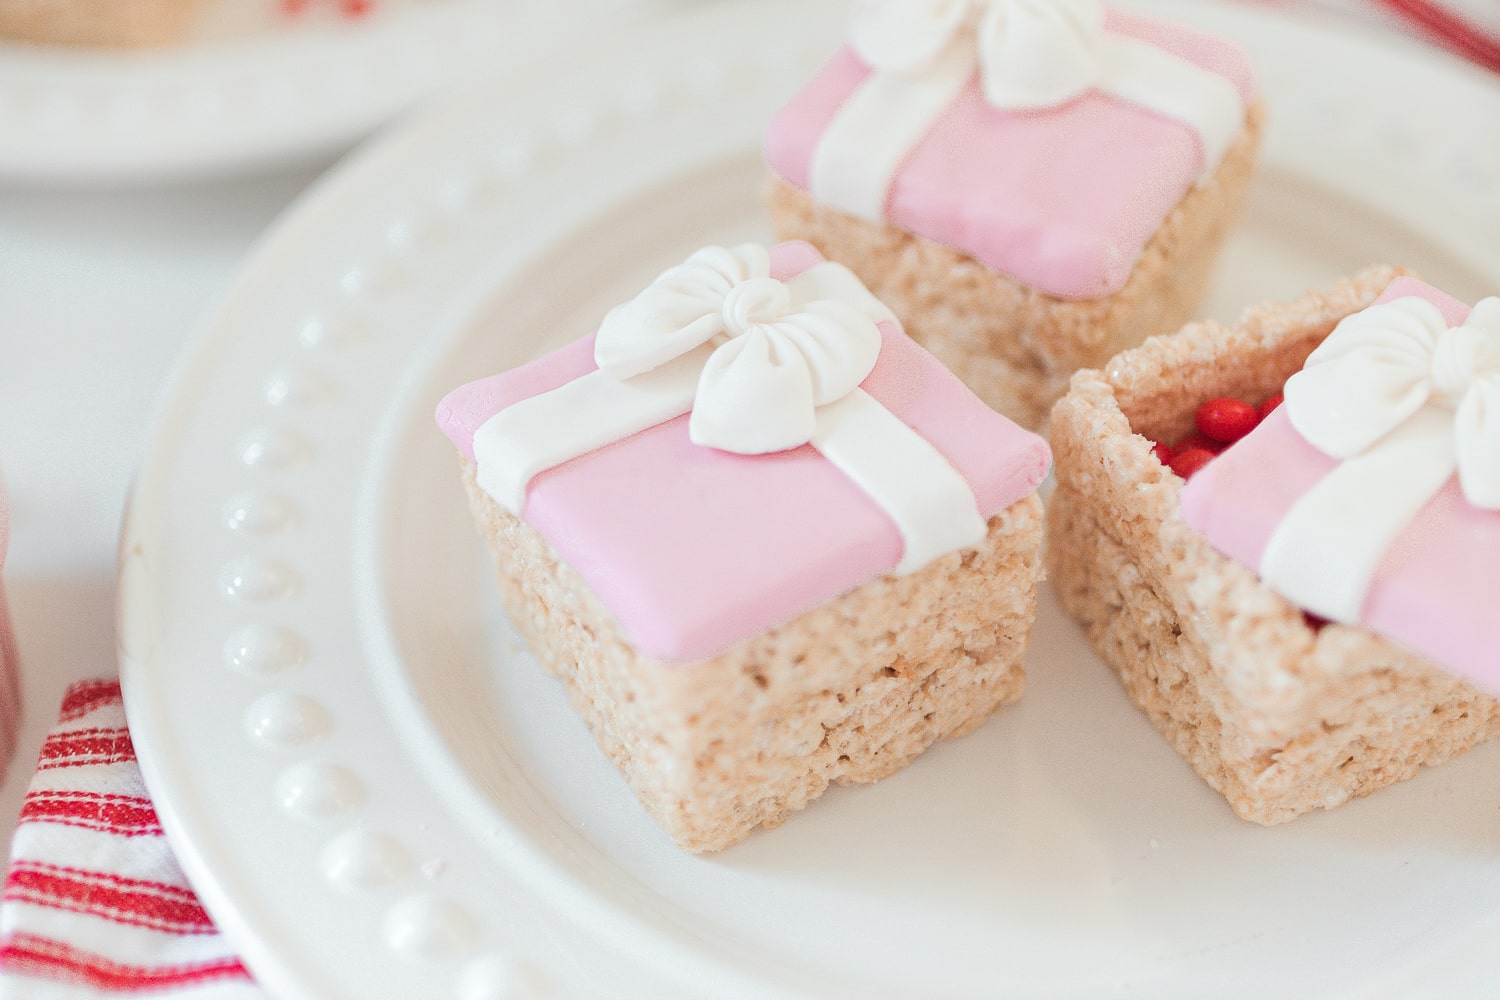 Southern lifestyle blogger Stephanie Ziajka shares ideas for decorating rice krispie treats for Christmas on Diary of a Debutante